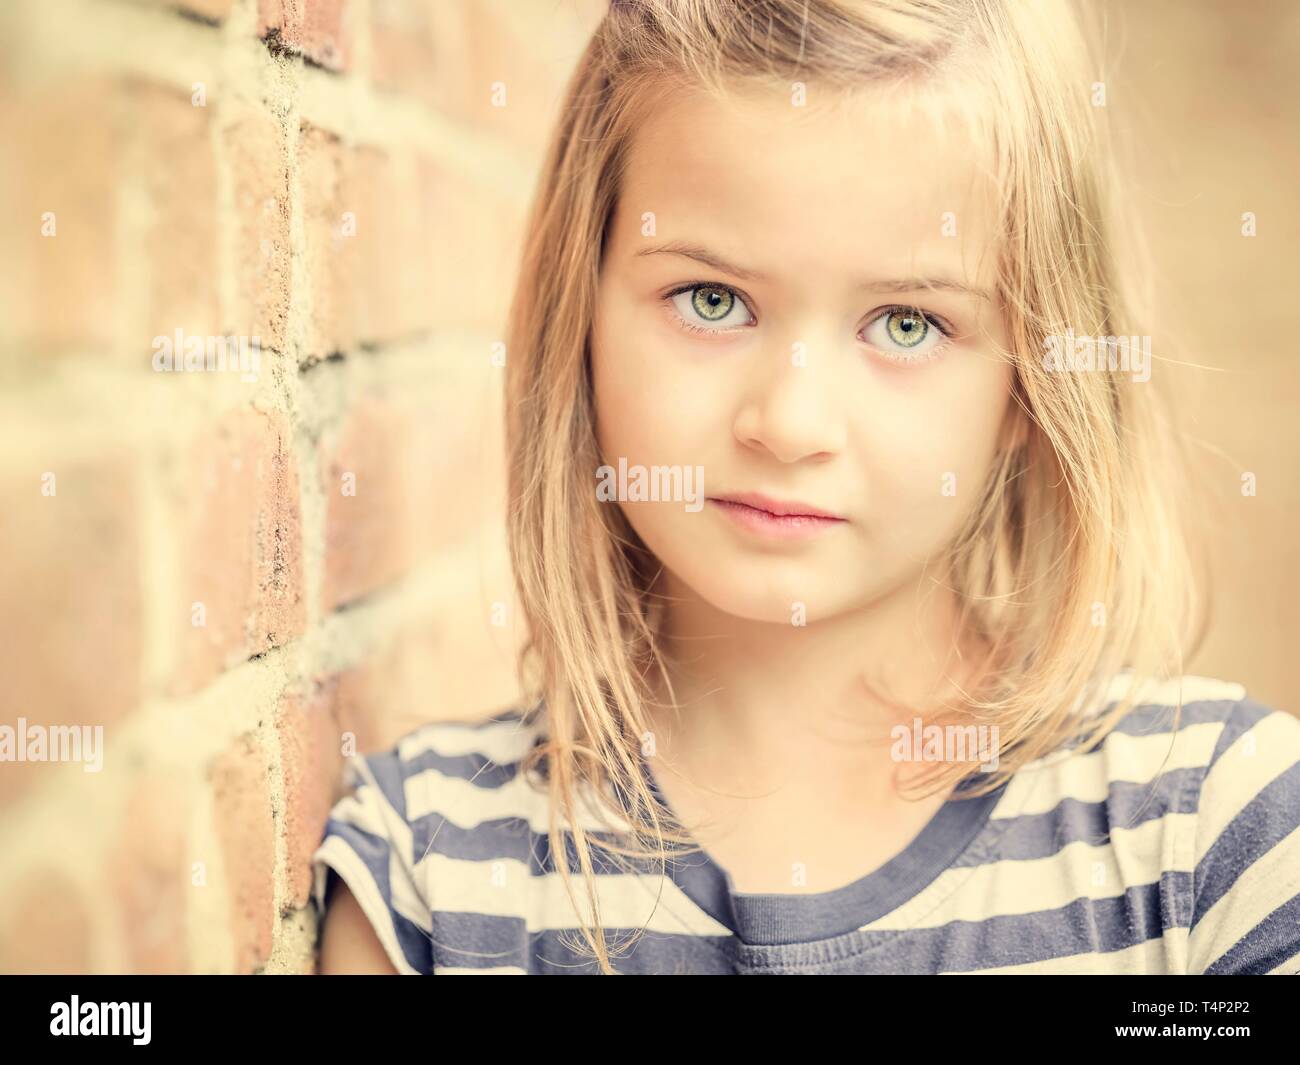 Girl, 10 years, leans against a wall, direct view, face, portrait, Germany Stock Photo